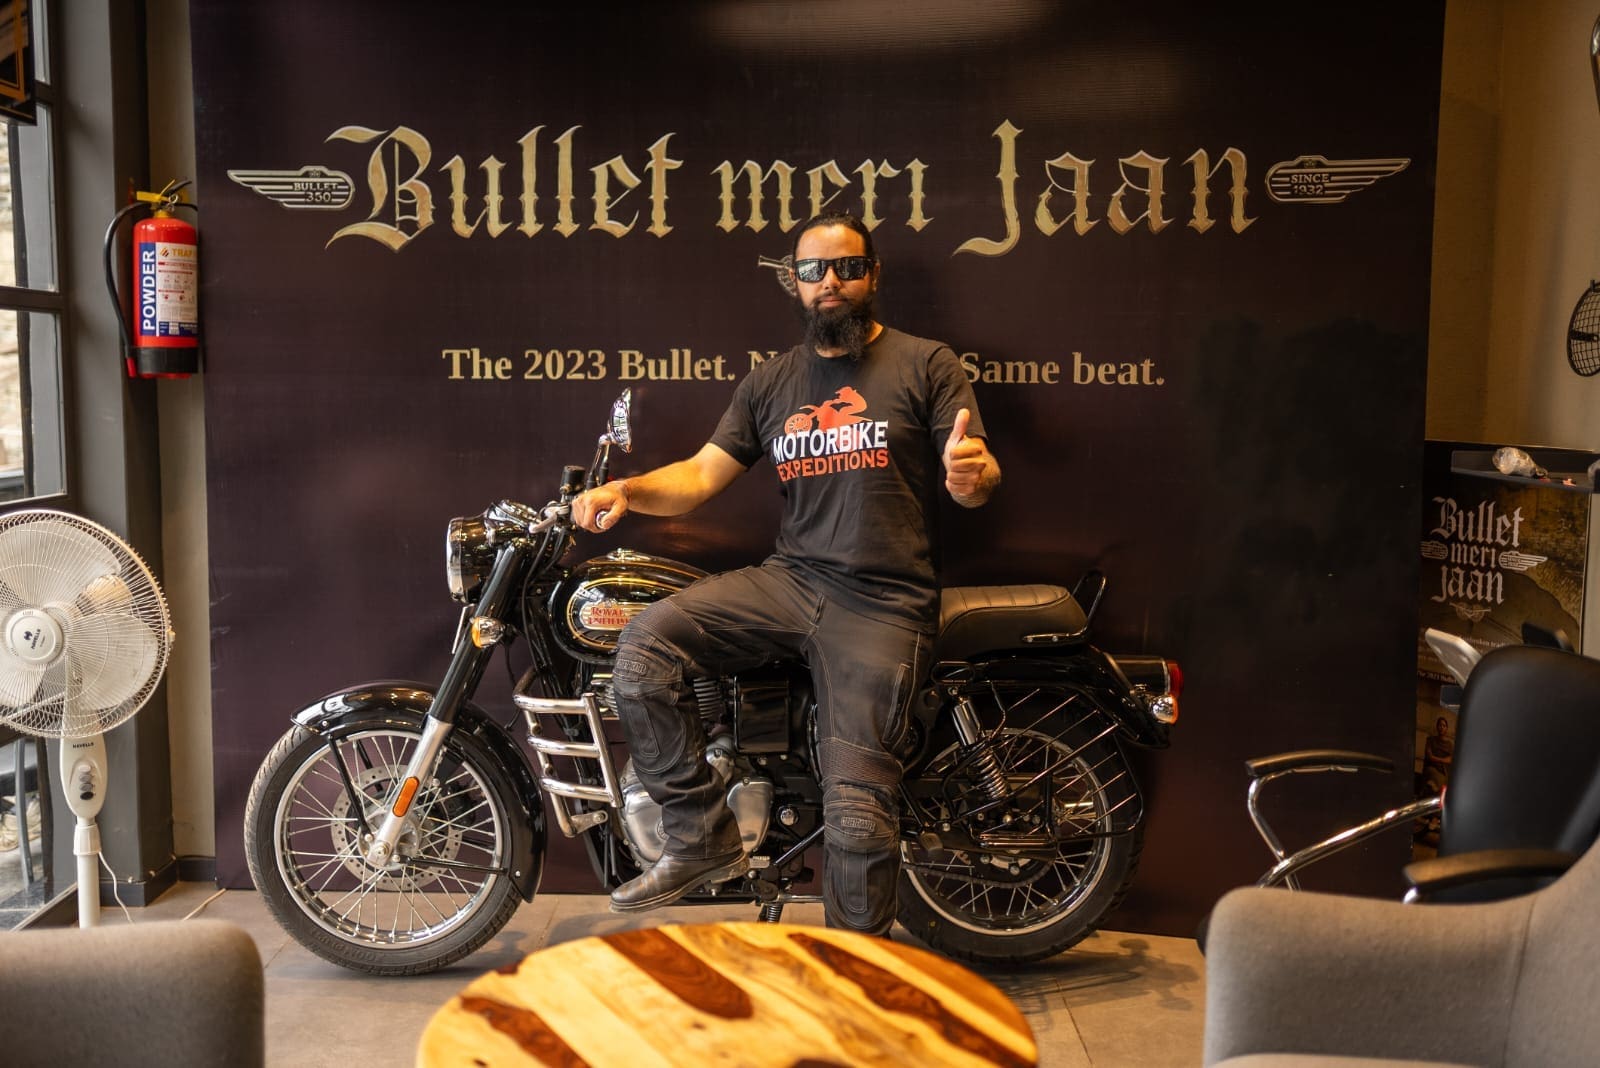 akshay is at RE shop and sit on the bike with backround "bullet meri jaan"